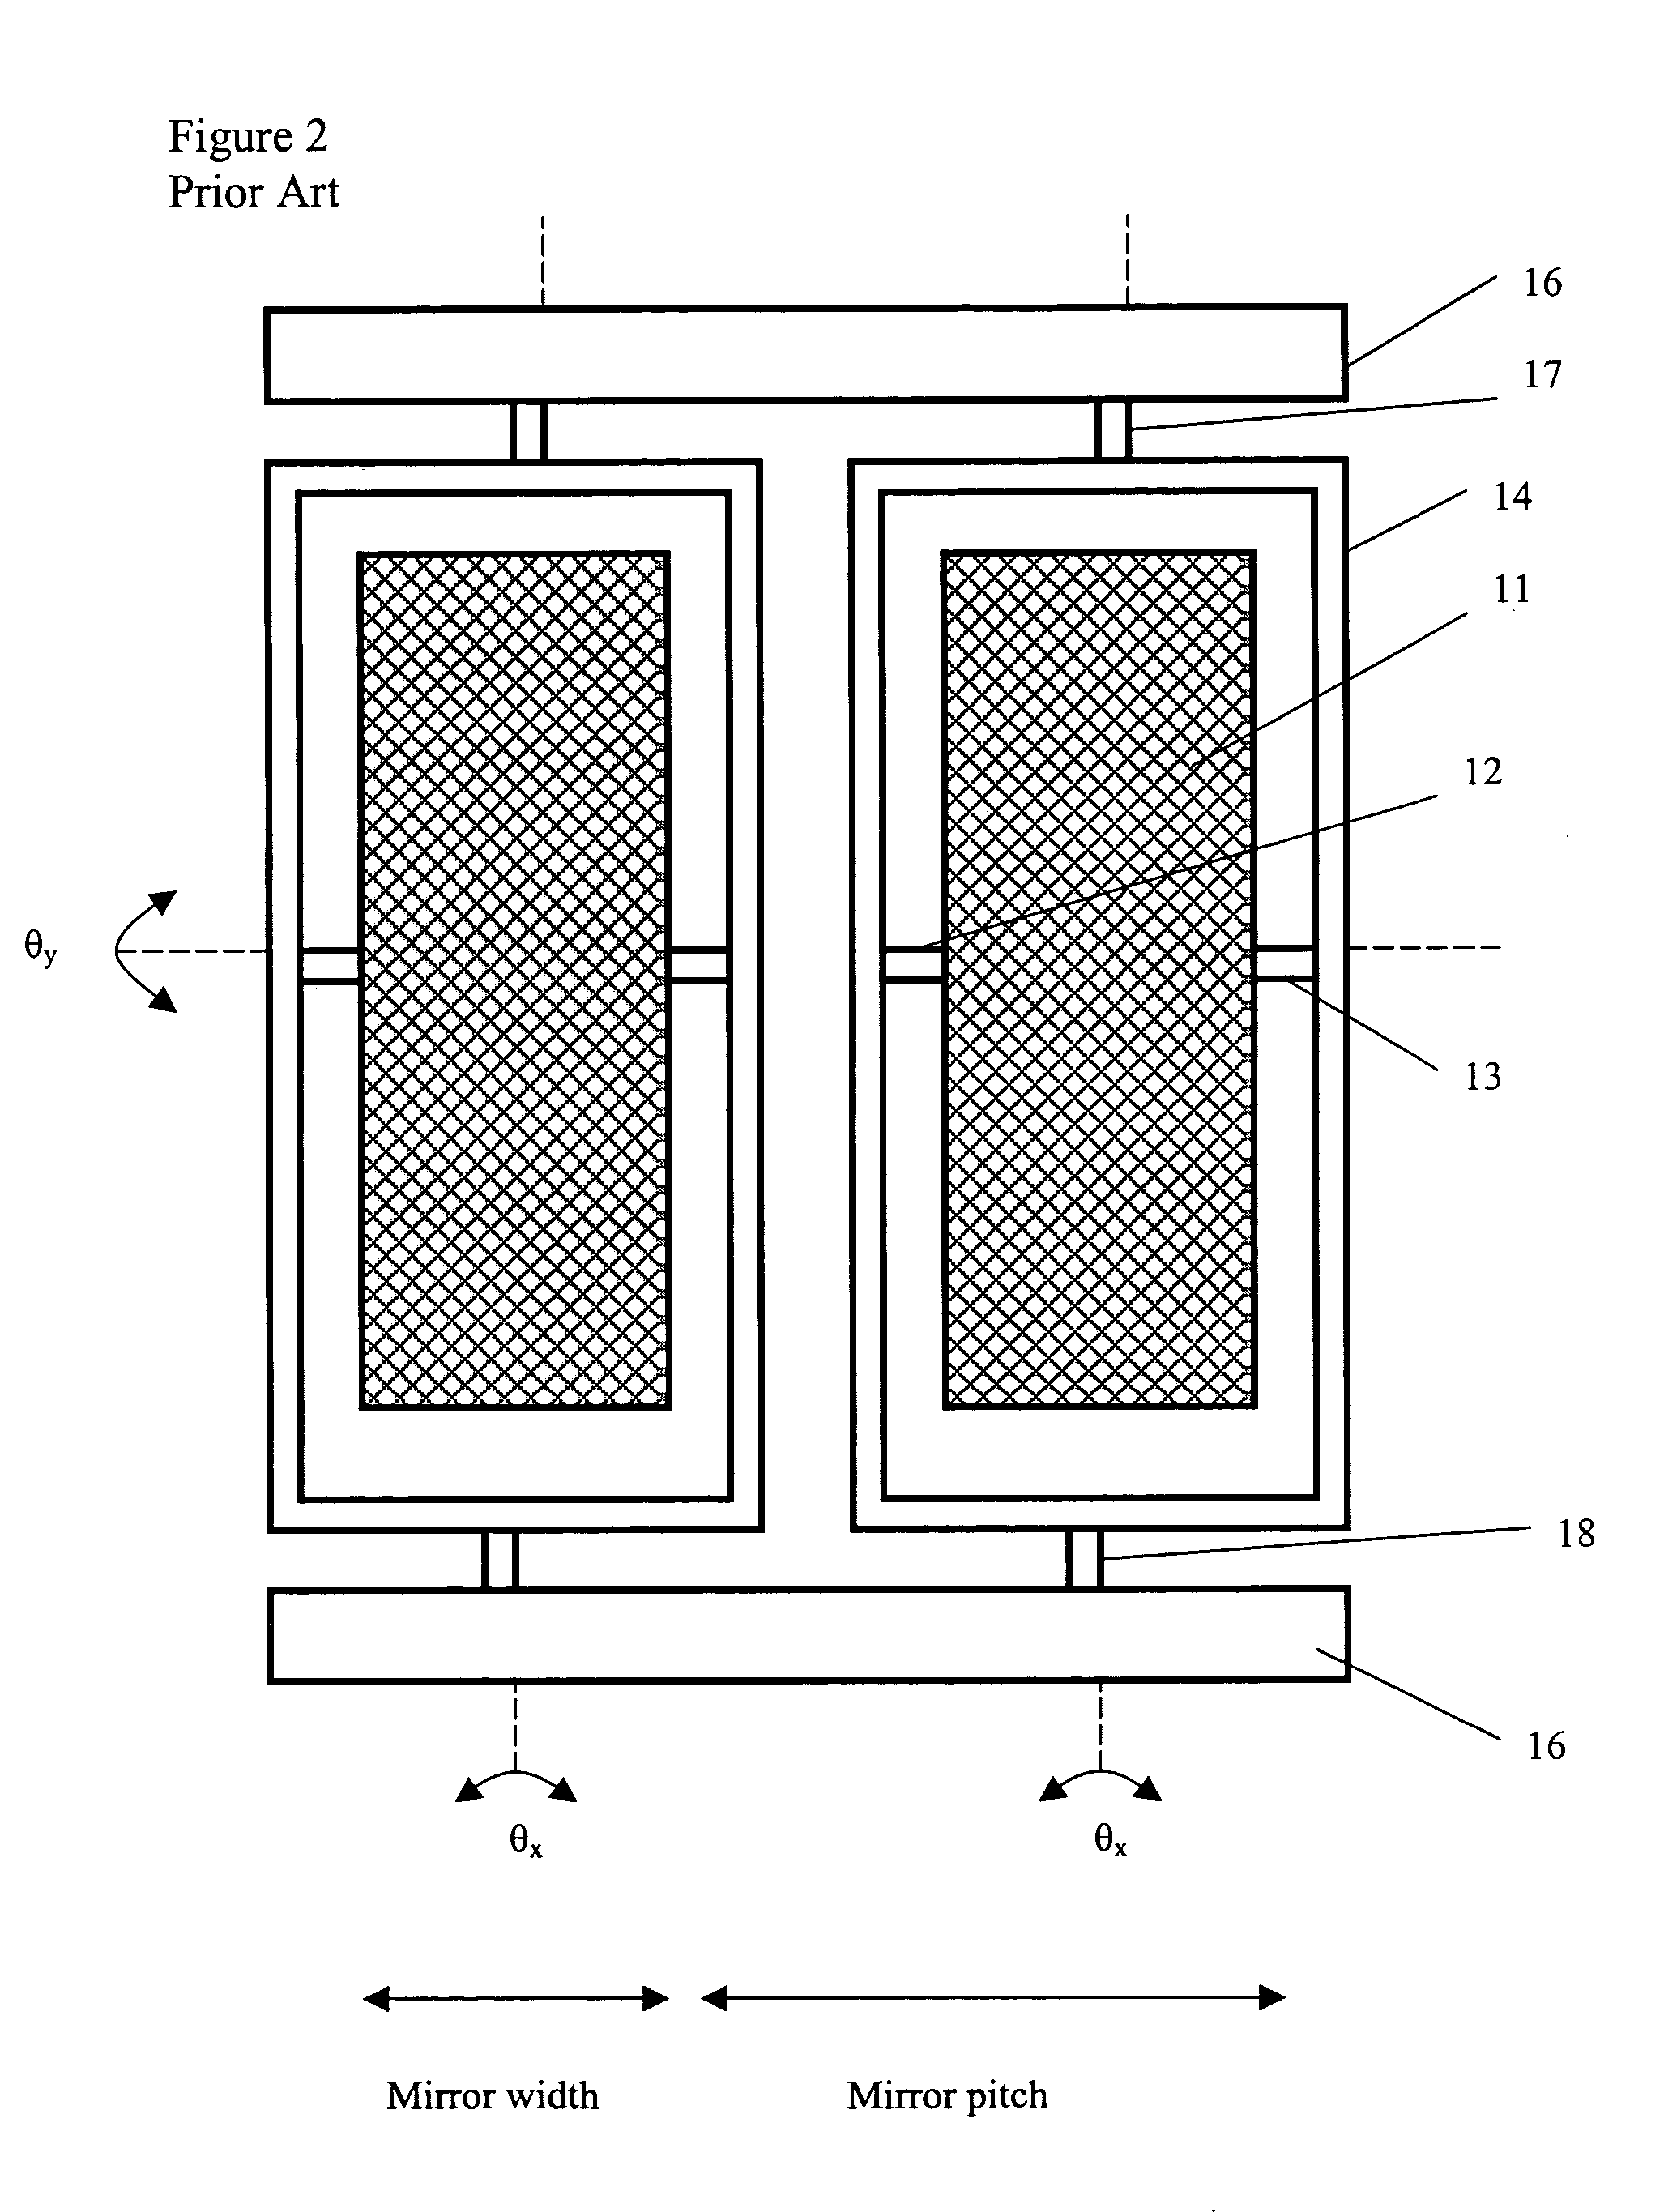 Electrode configuration for piano MEMs micromirror